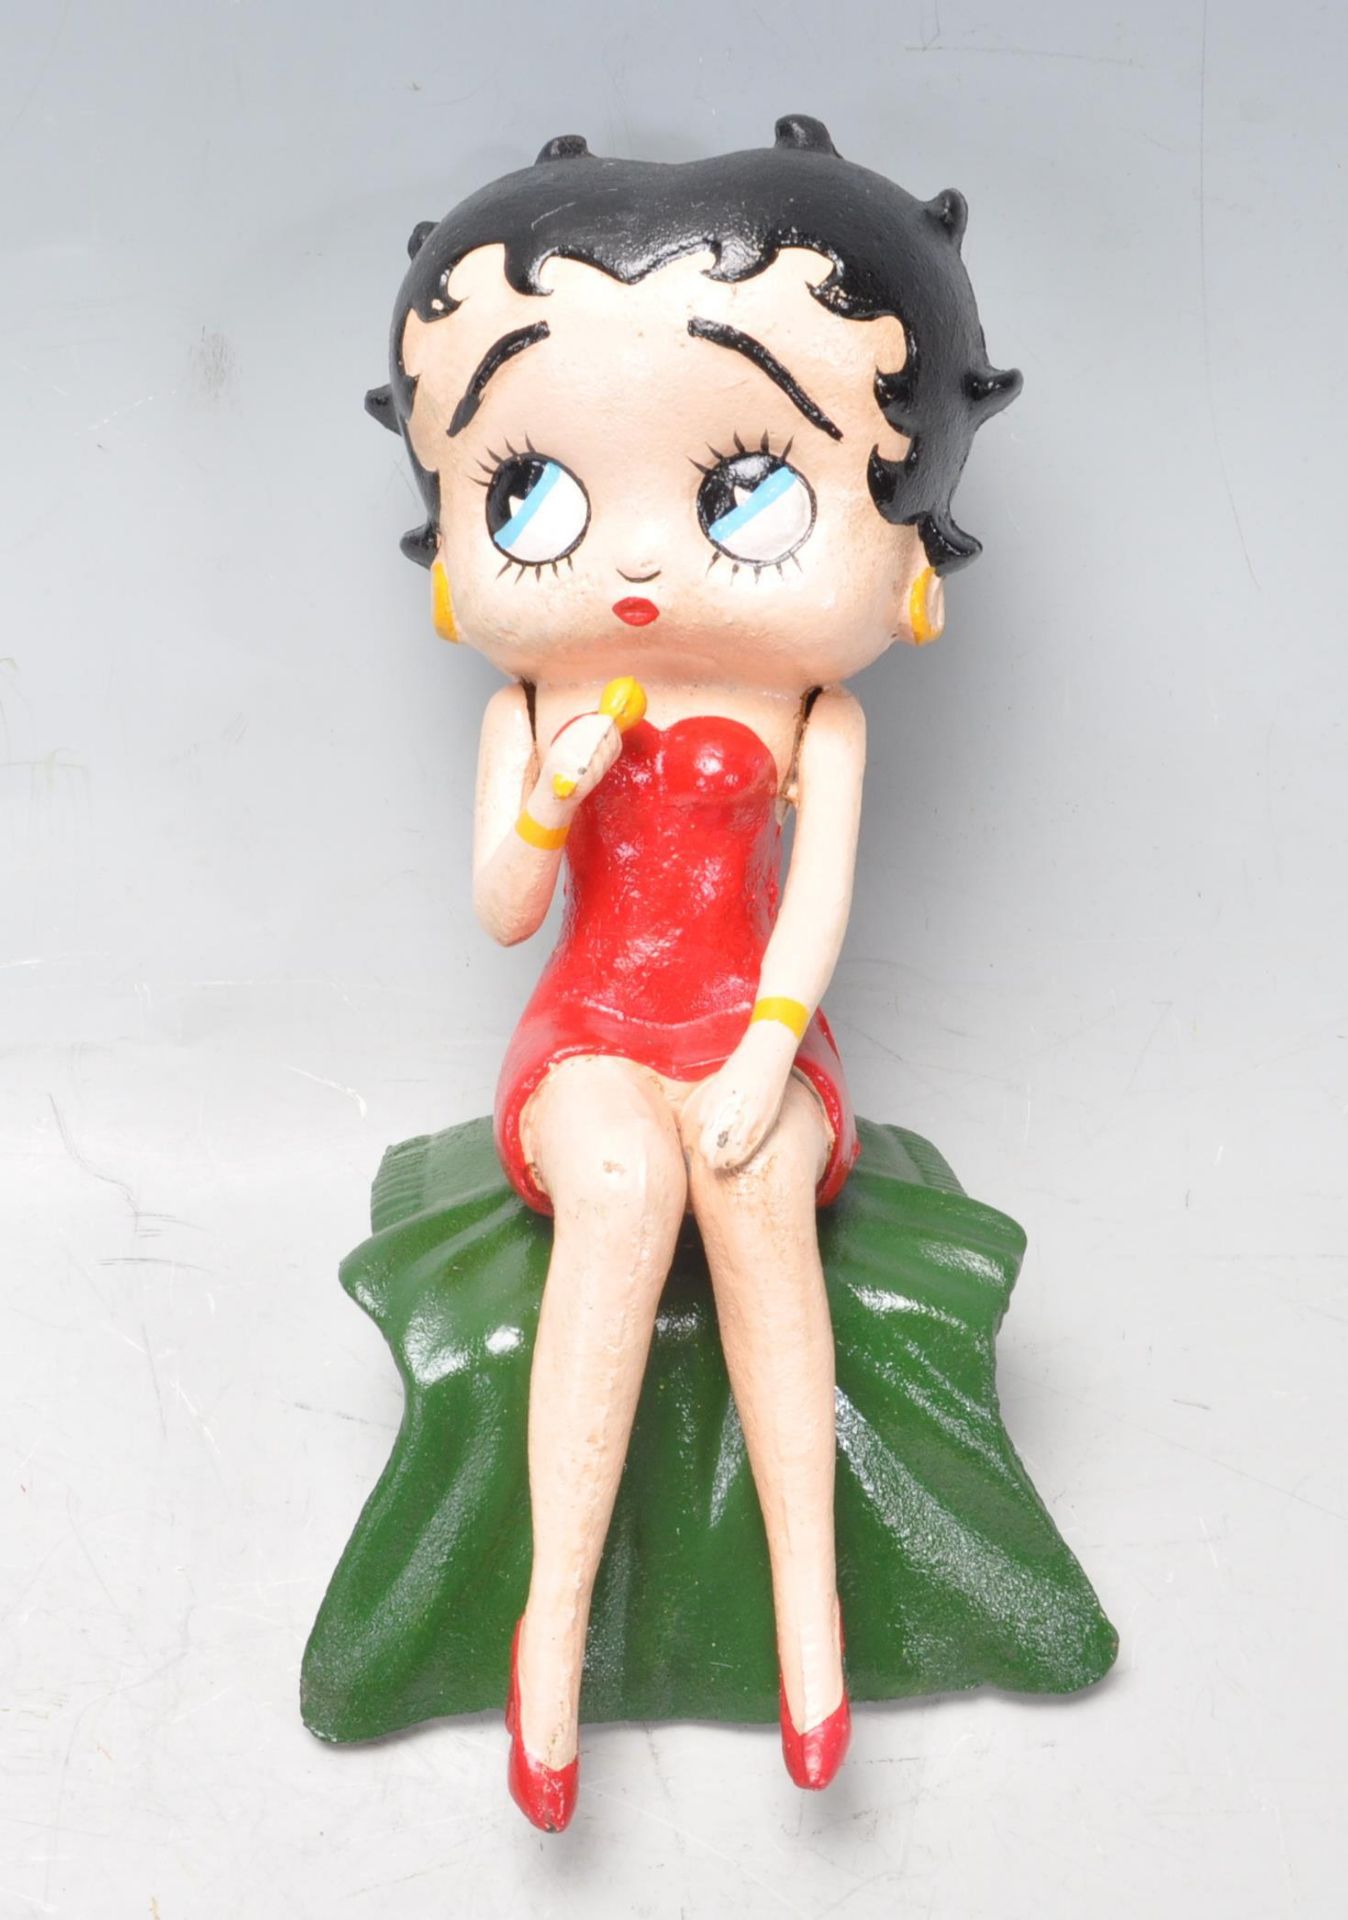 VINTAGE STYLE CAST IRON BETTY BOOP FIGURINE - Image 4 of 4